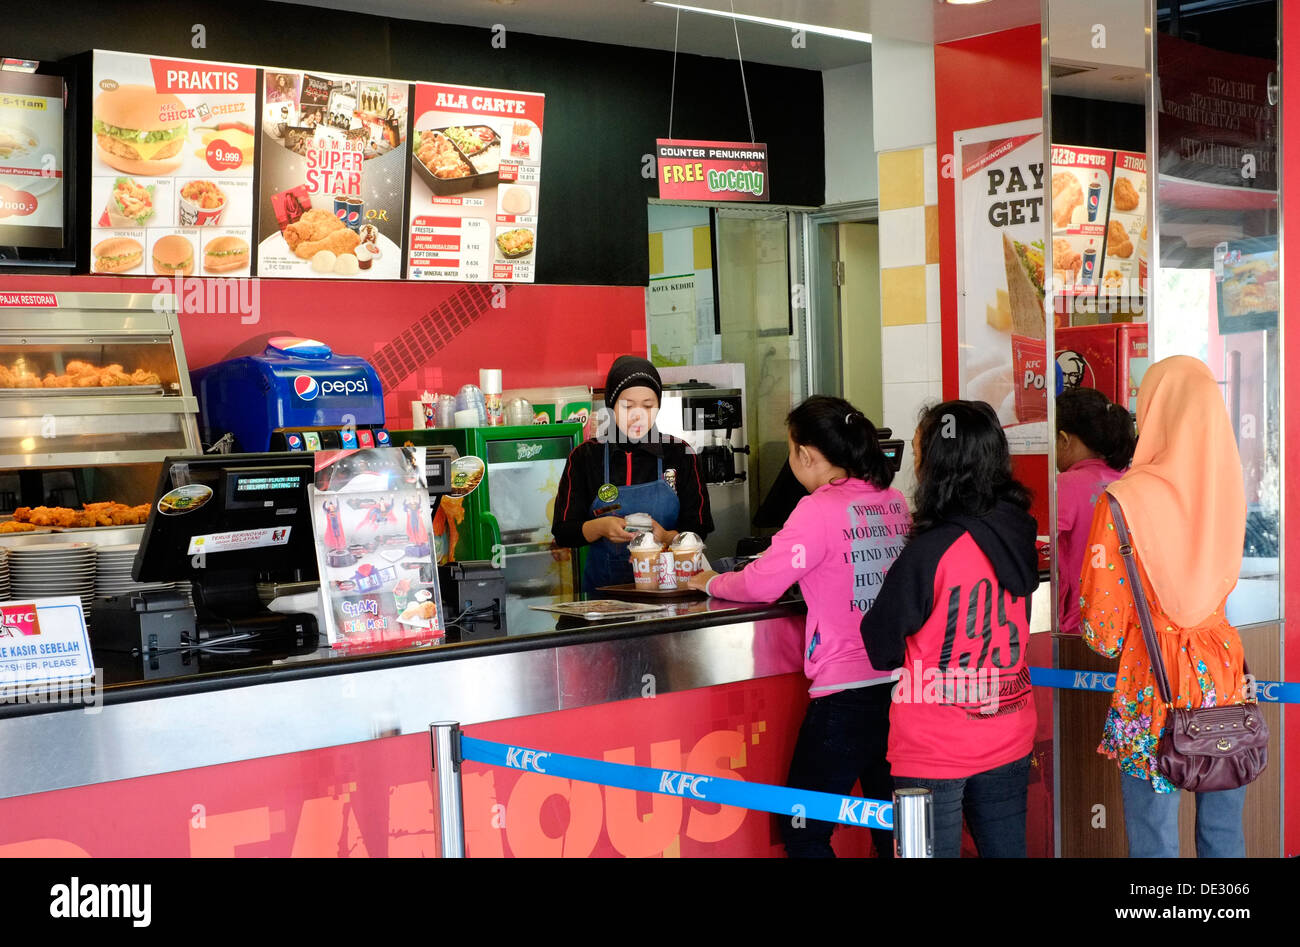 customers queue for fast food in a kentucky fried chicken branch in kediri java indonesia Stock Photo